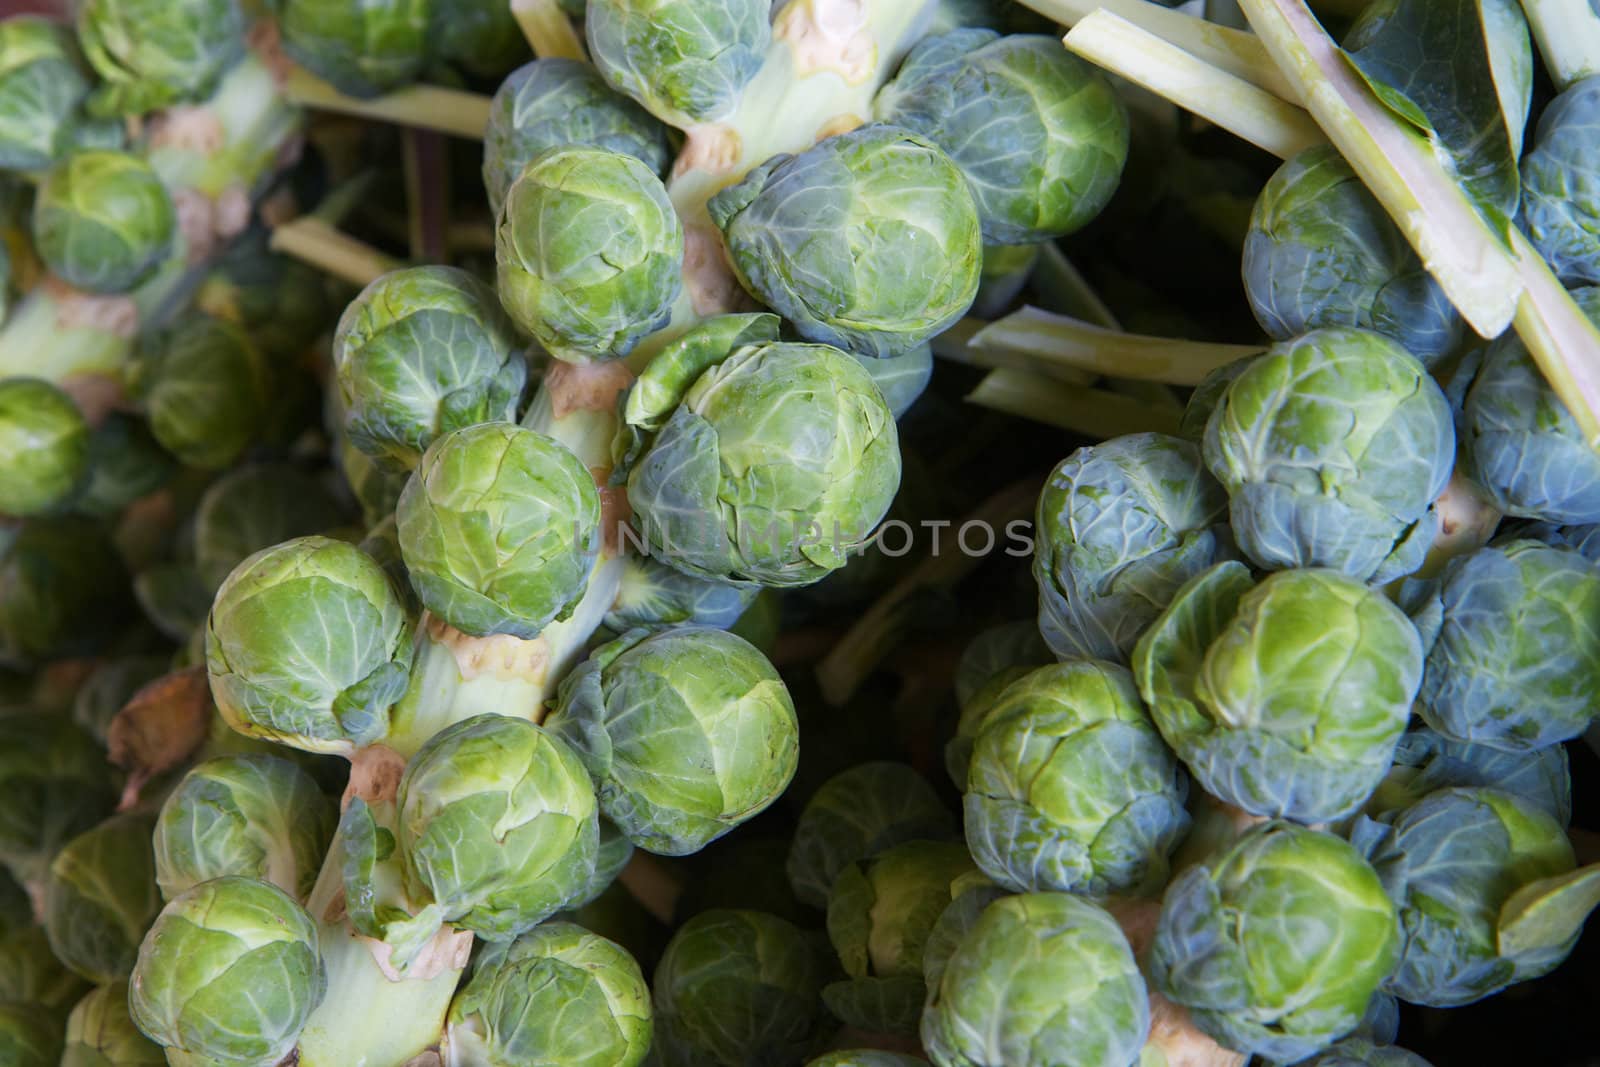 Macro of several green brussle sprout stalks at the farmers market